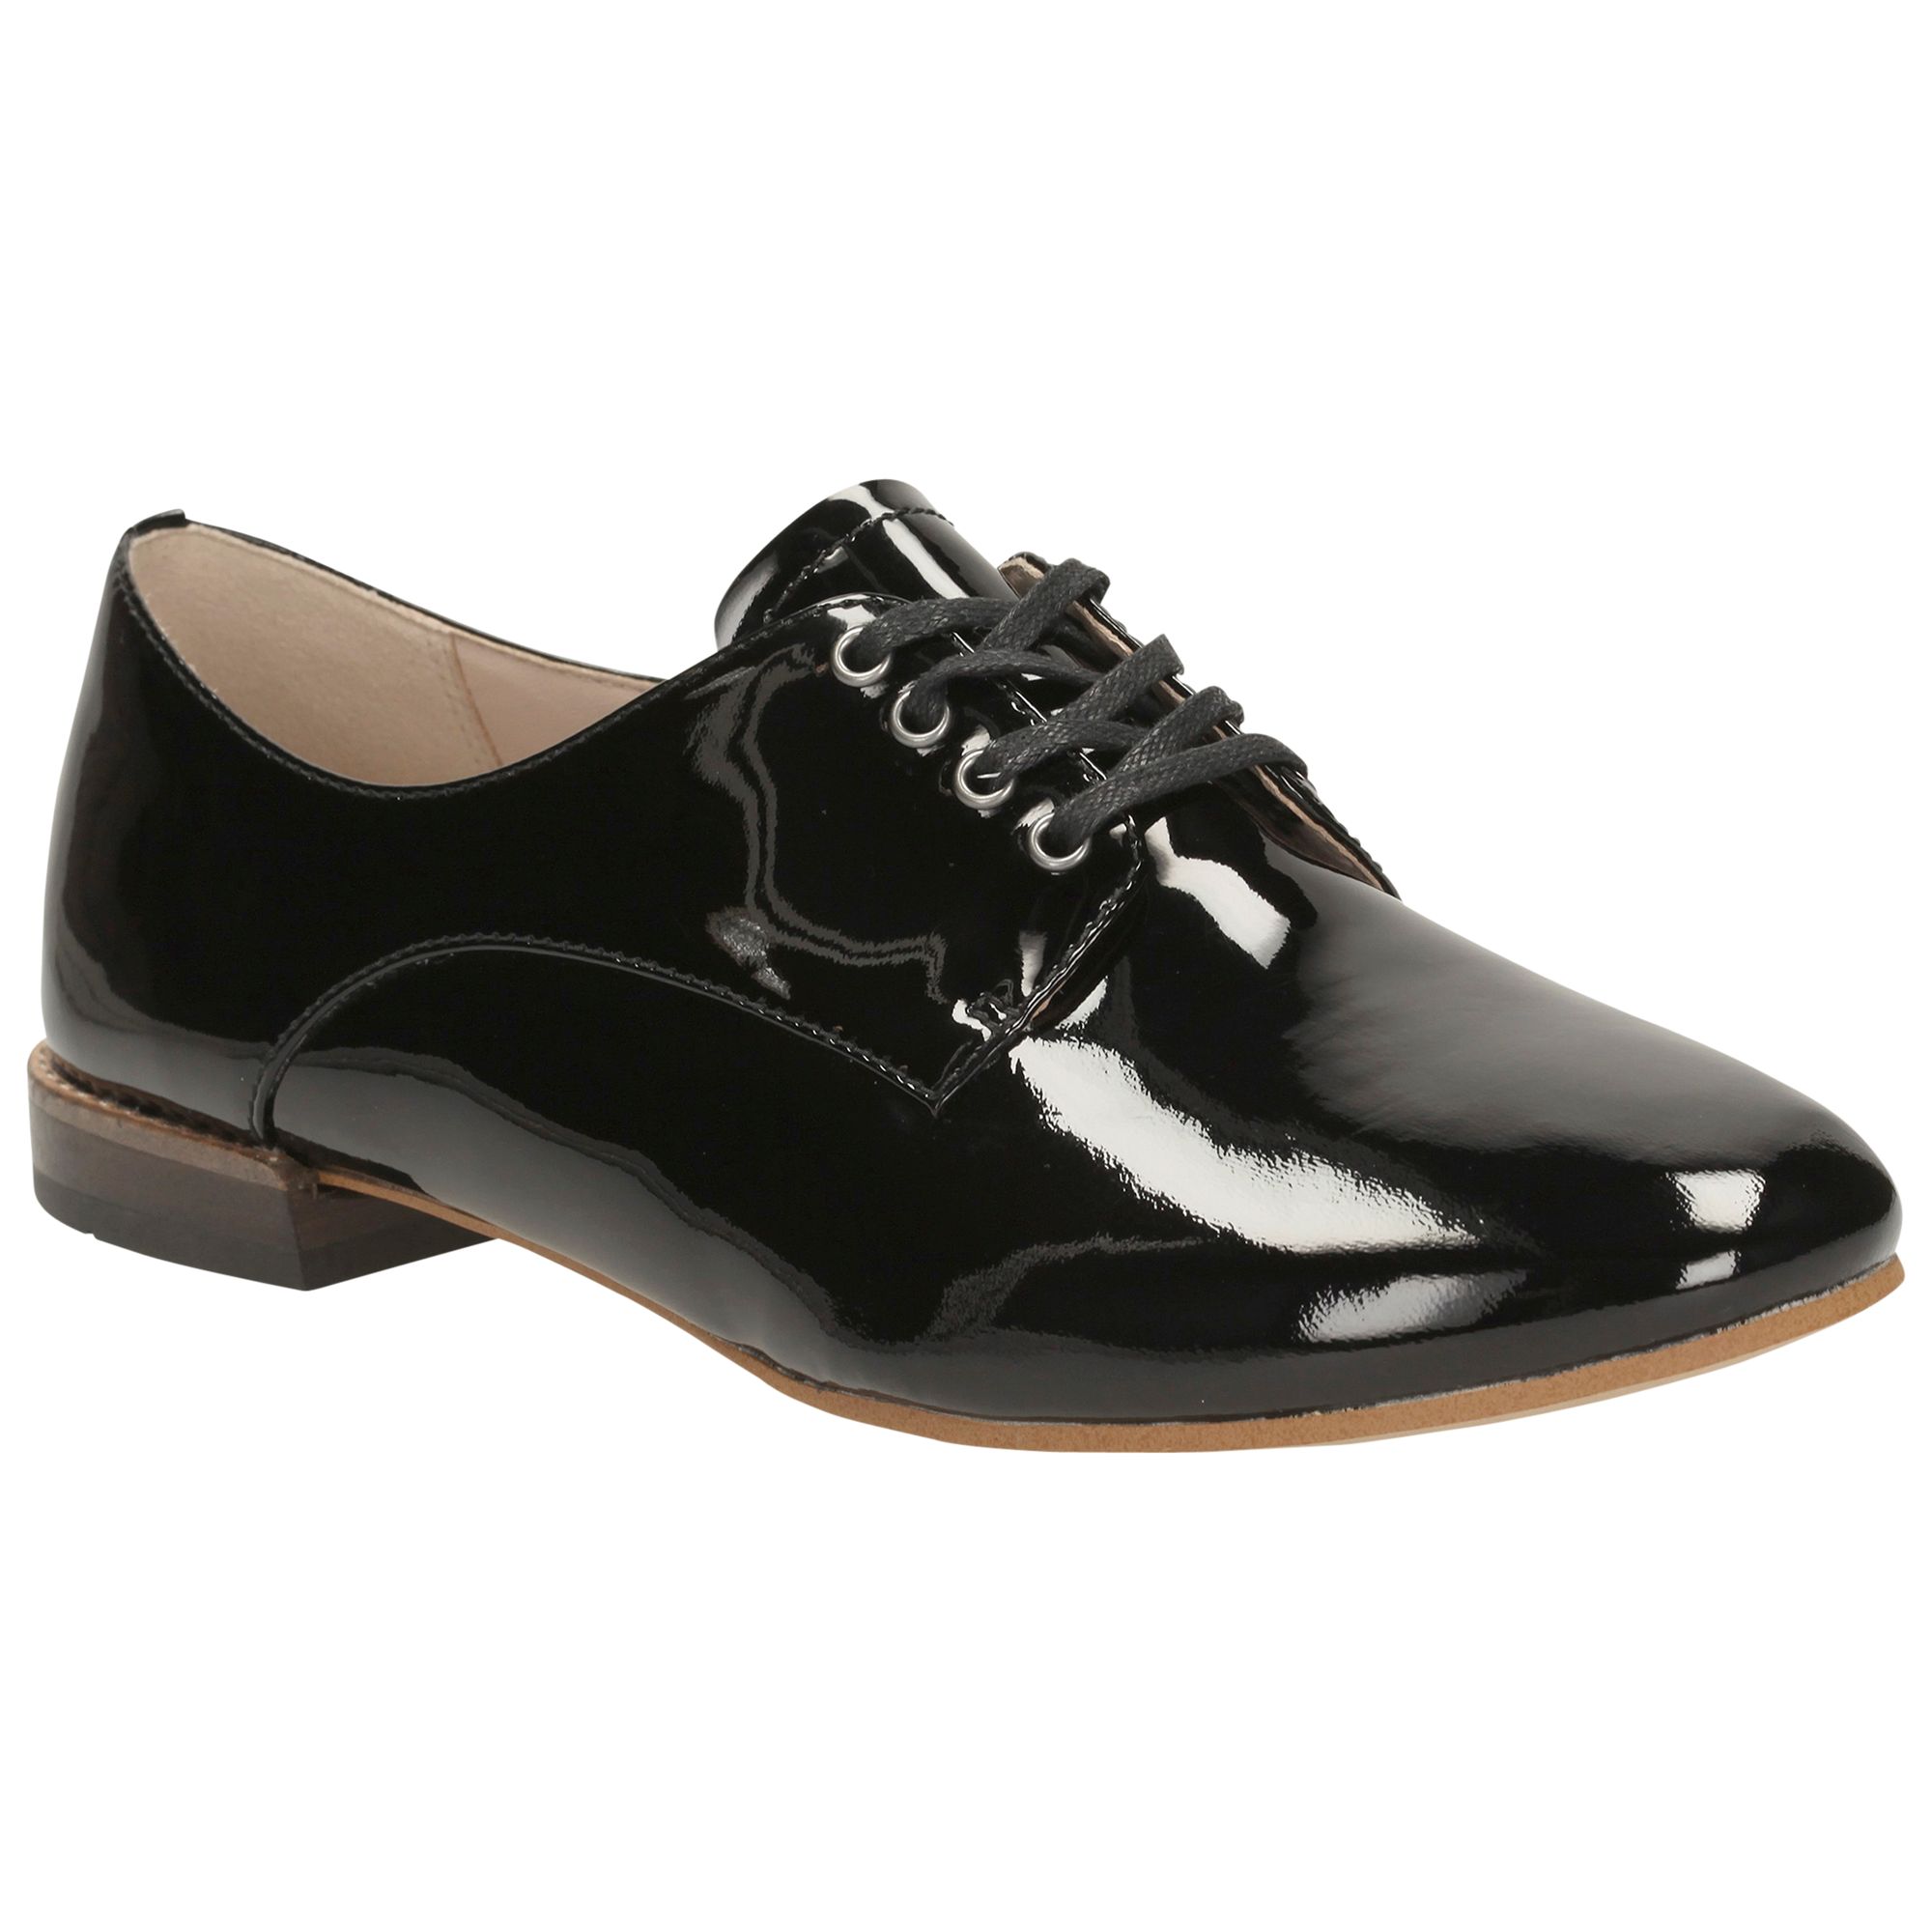 clarks festival gala patent leather shoes